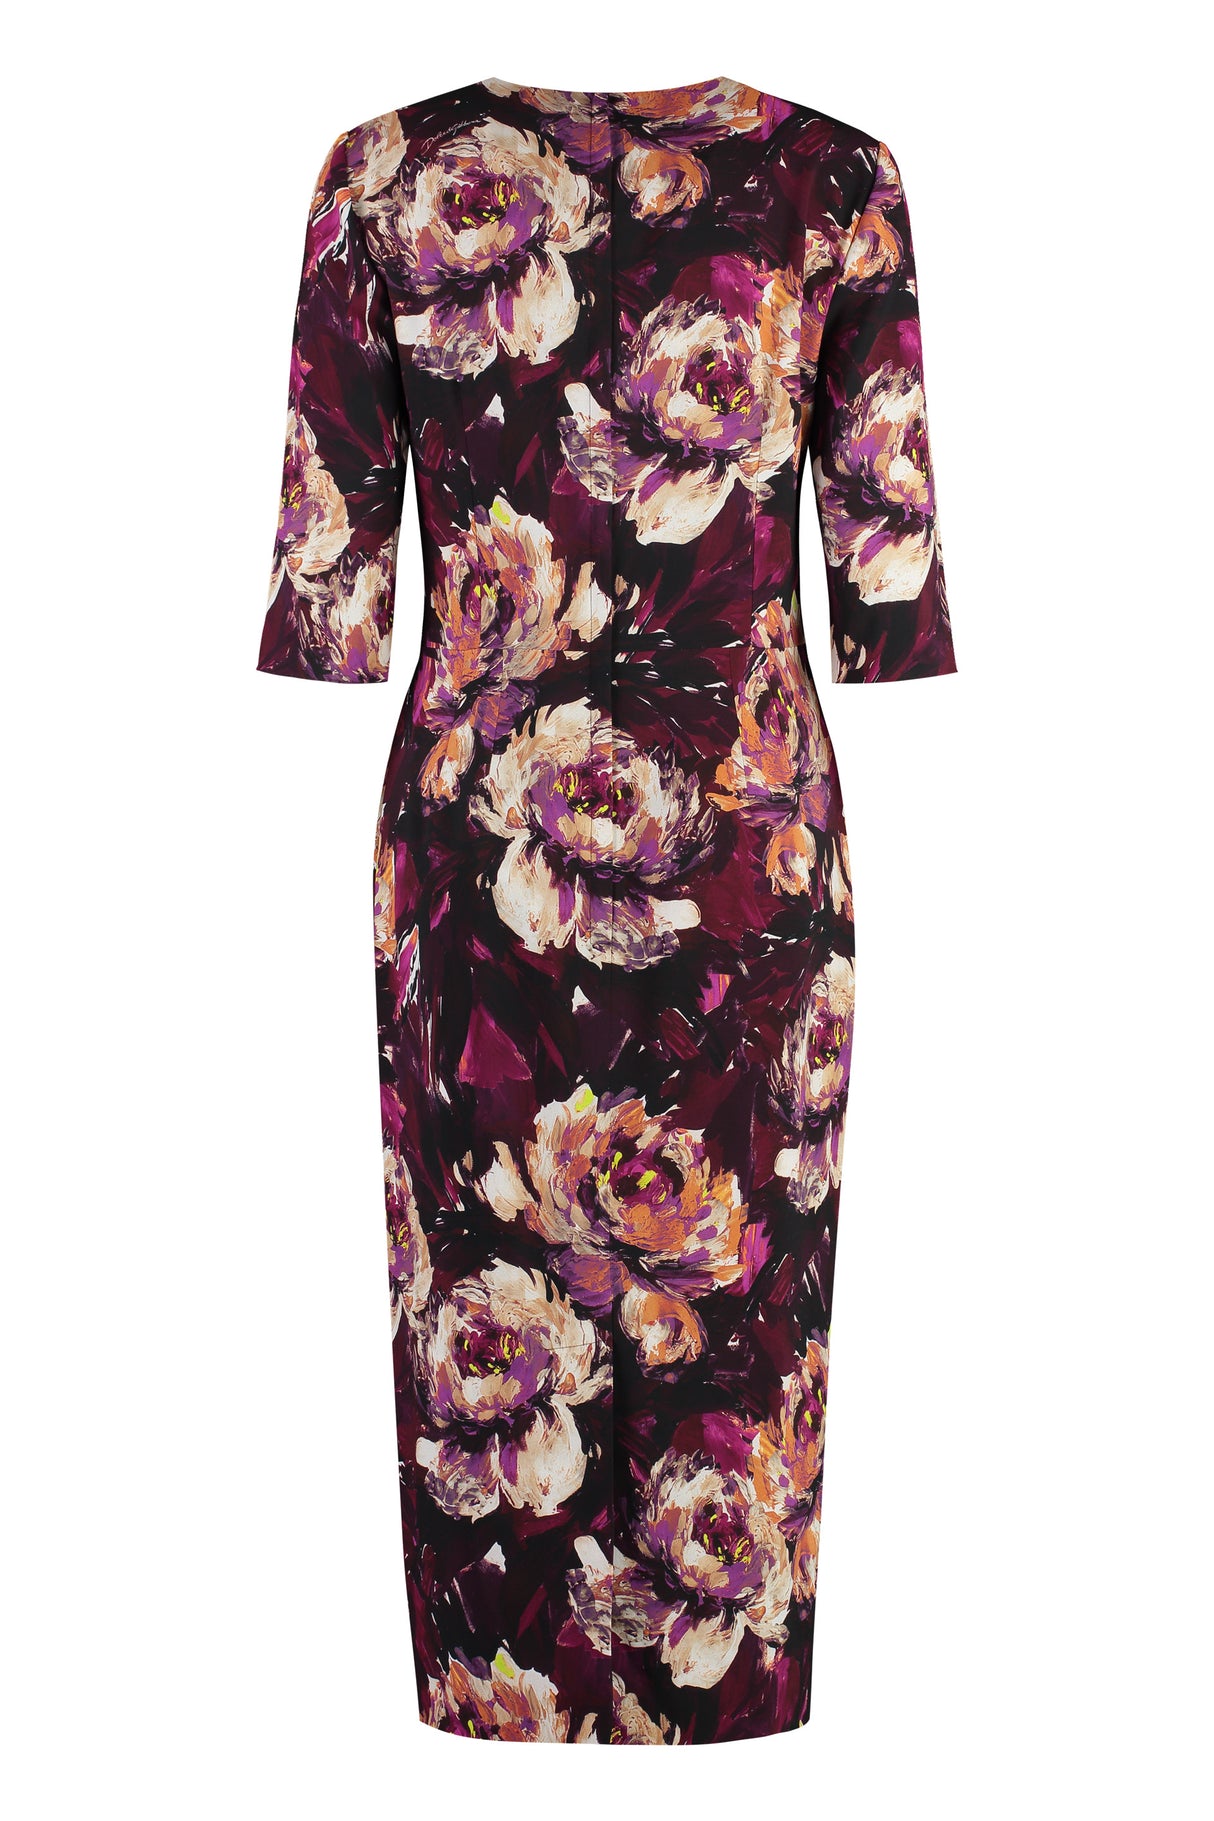 DOLCE & GABBANA Floral and Leopard Printed Cady Dress for Women - SS24